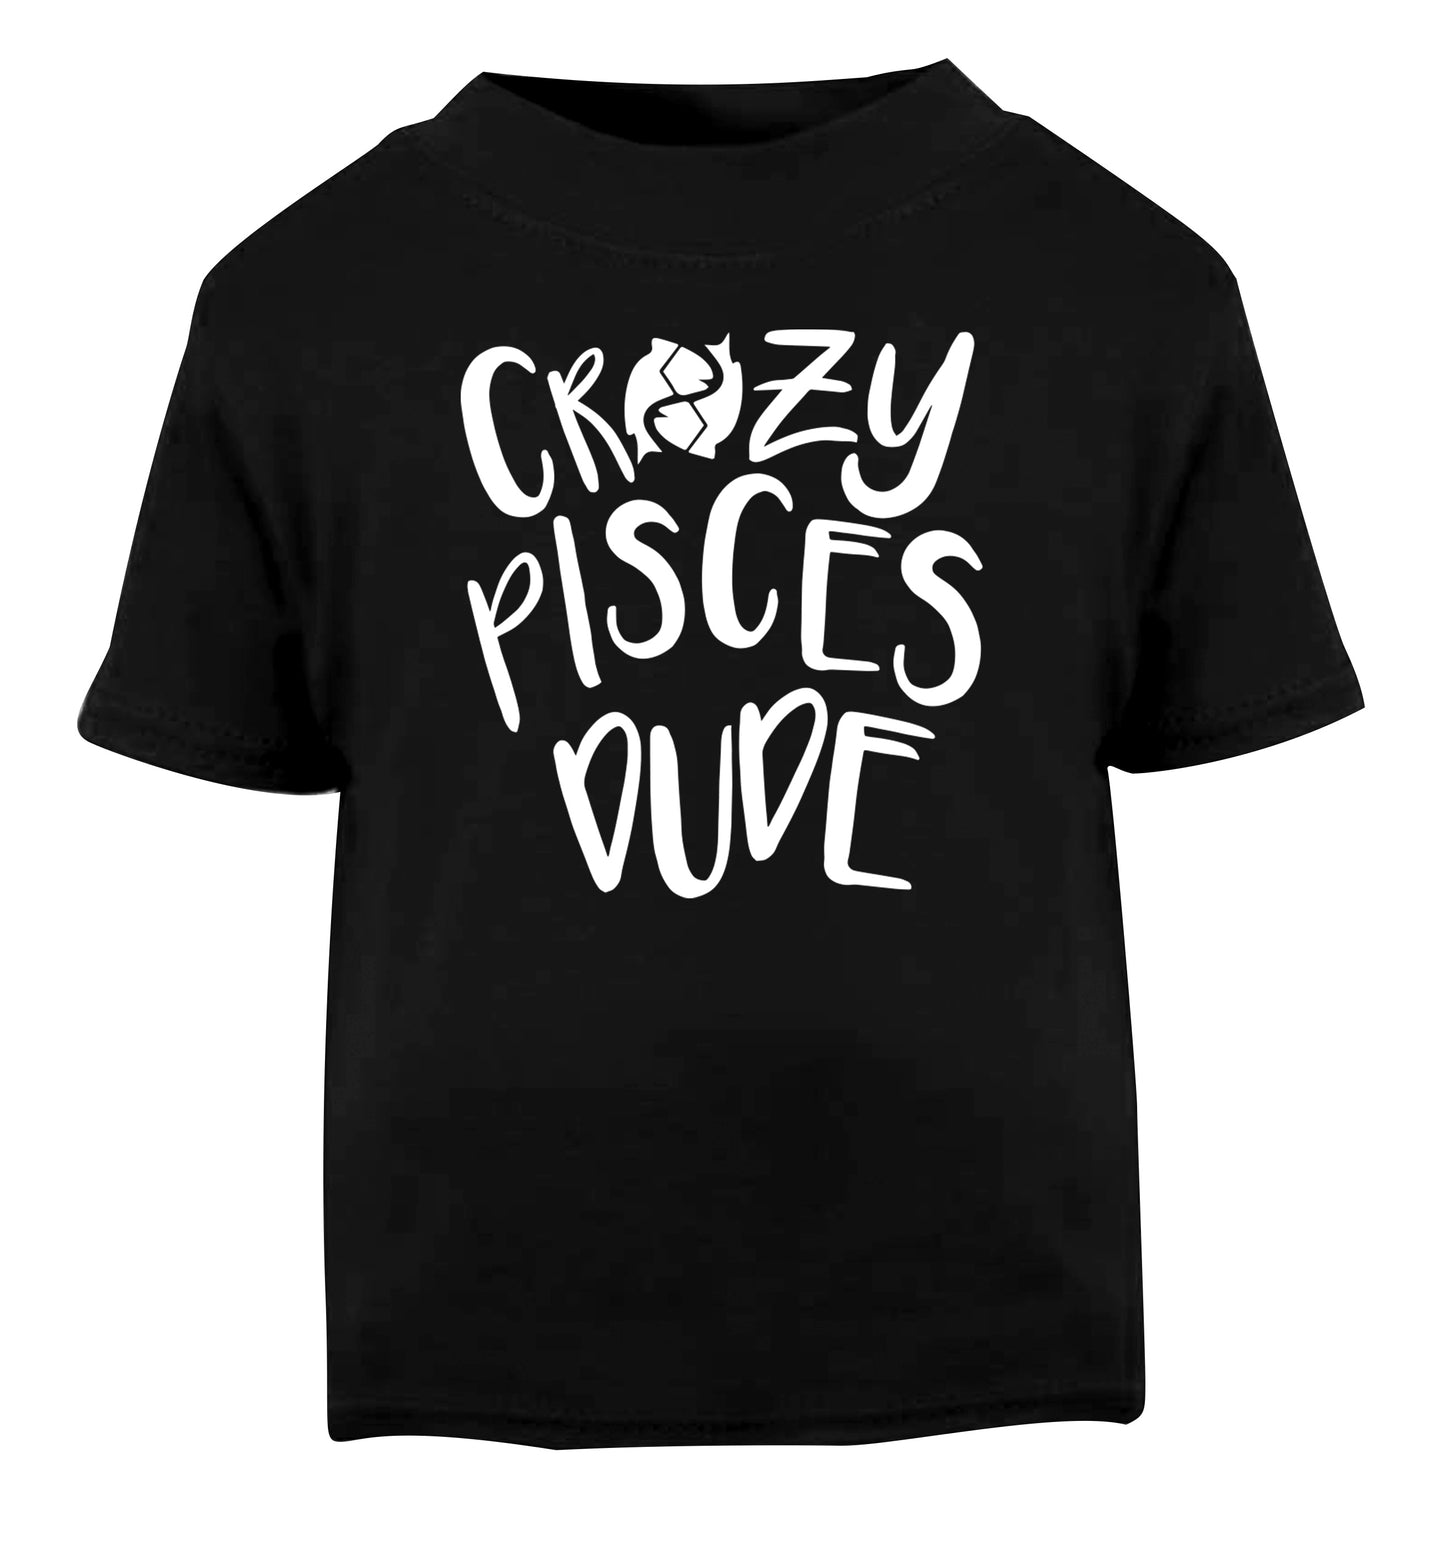 Crazy pisces dude Black Baby Toddler Tshirt 2 years